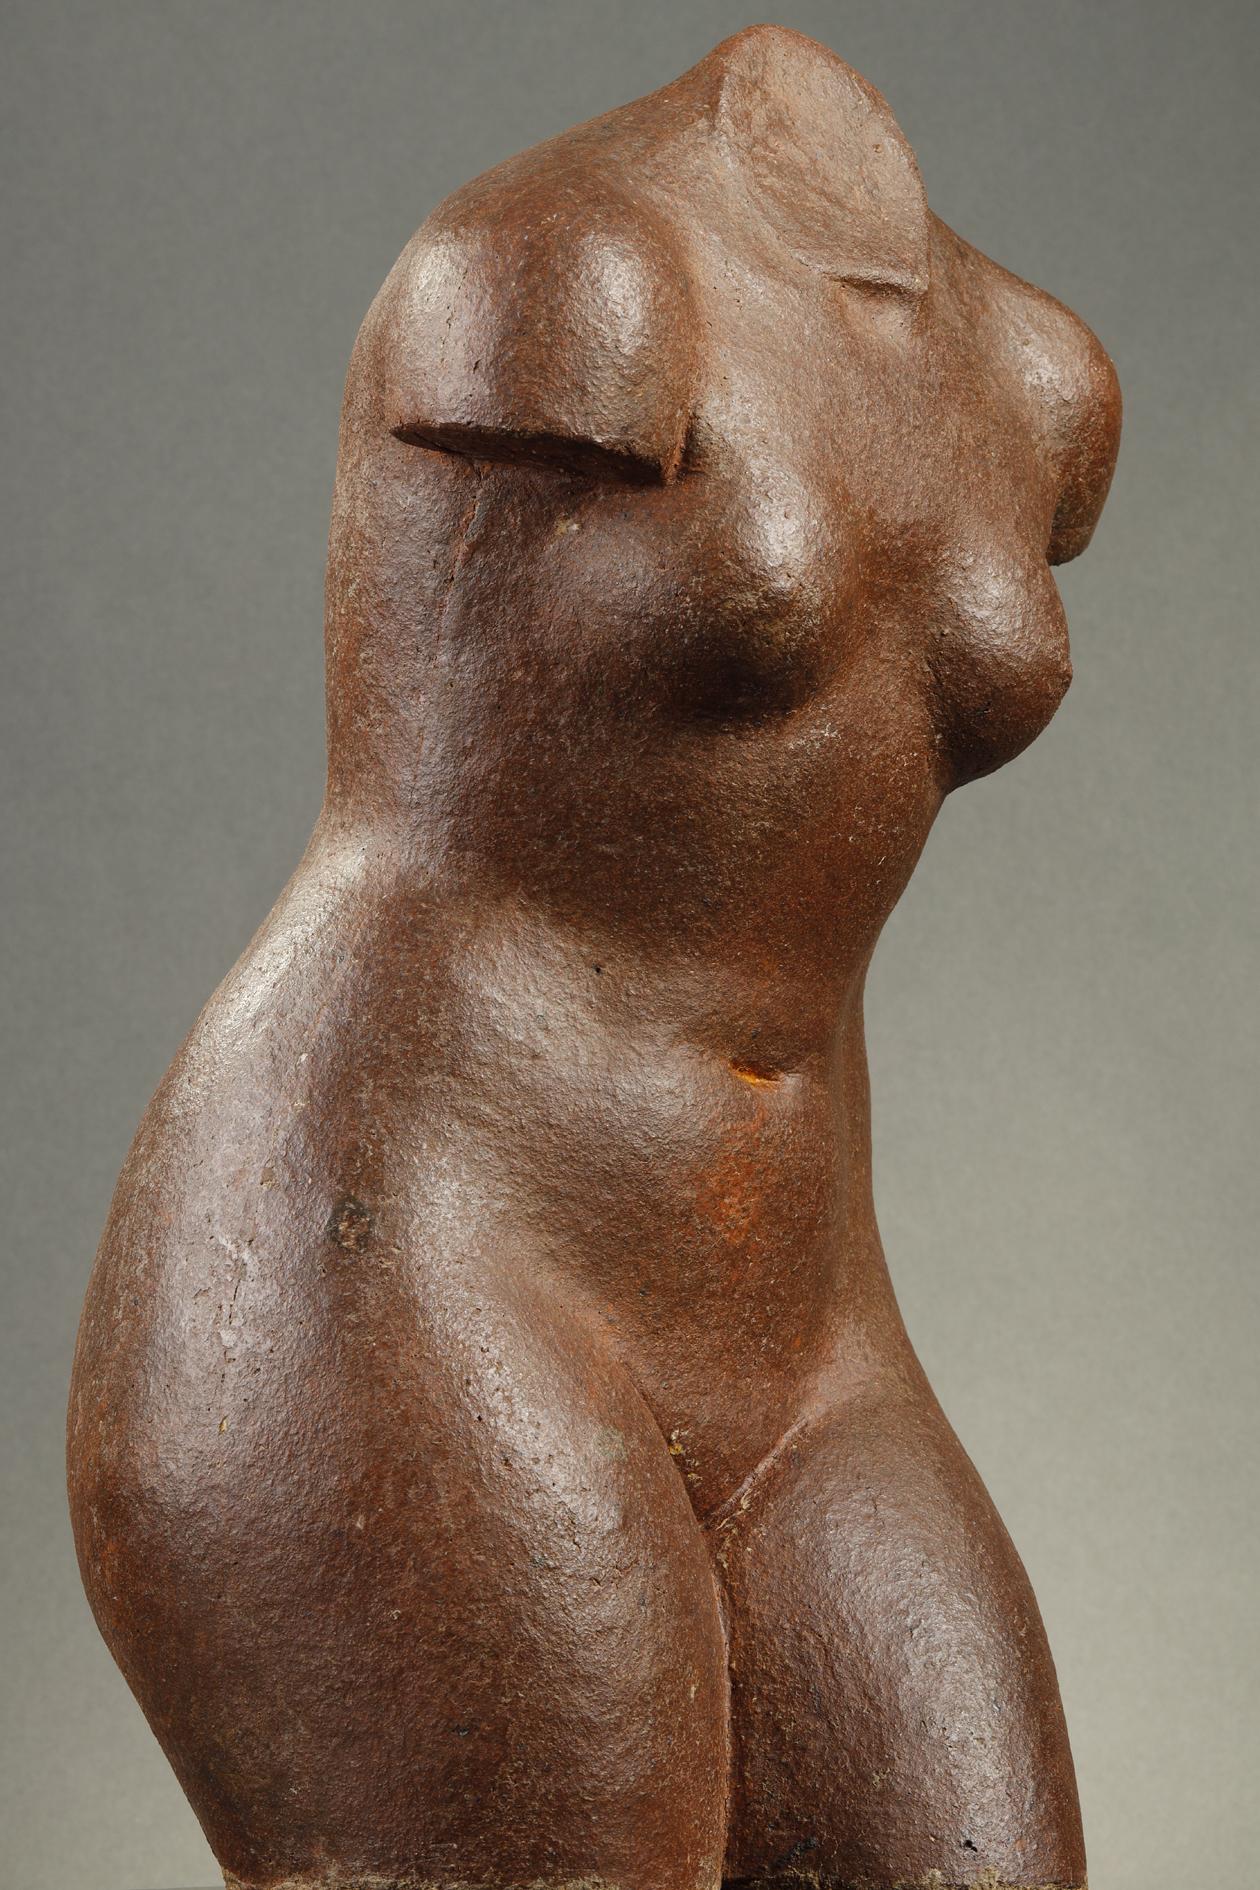 Torso of a Woman
by Marcel GIMOND (1894-1961)

Avery fine nuanced brown chamotte sandstone sculpture
raised on a dark grey marble base
signed on the arm with the monogram 